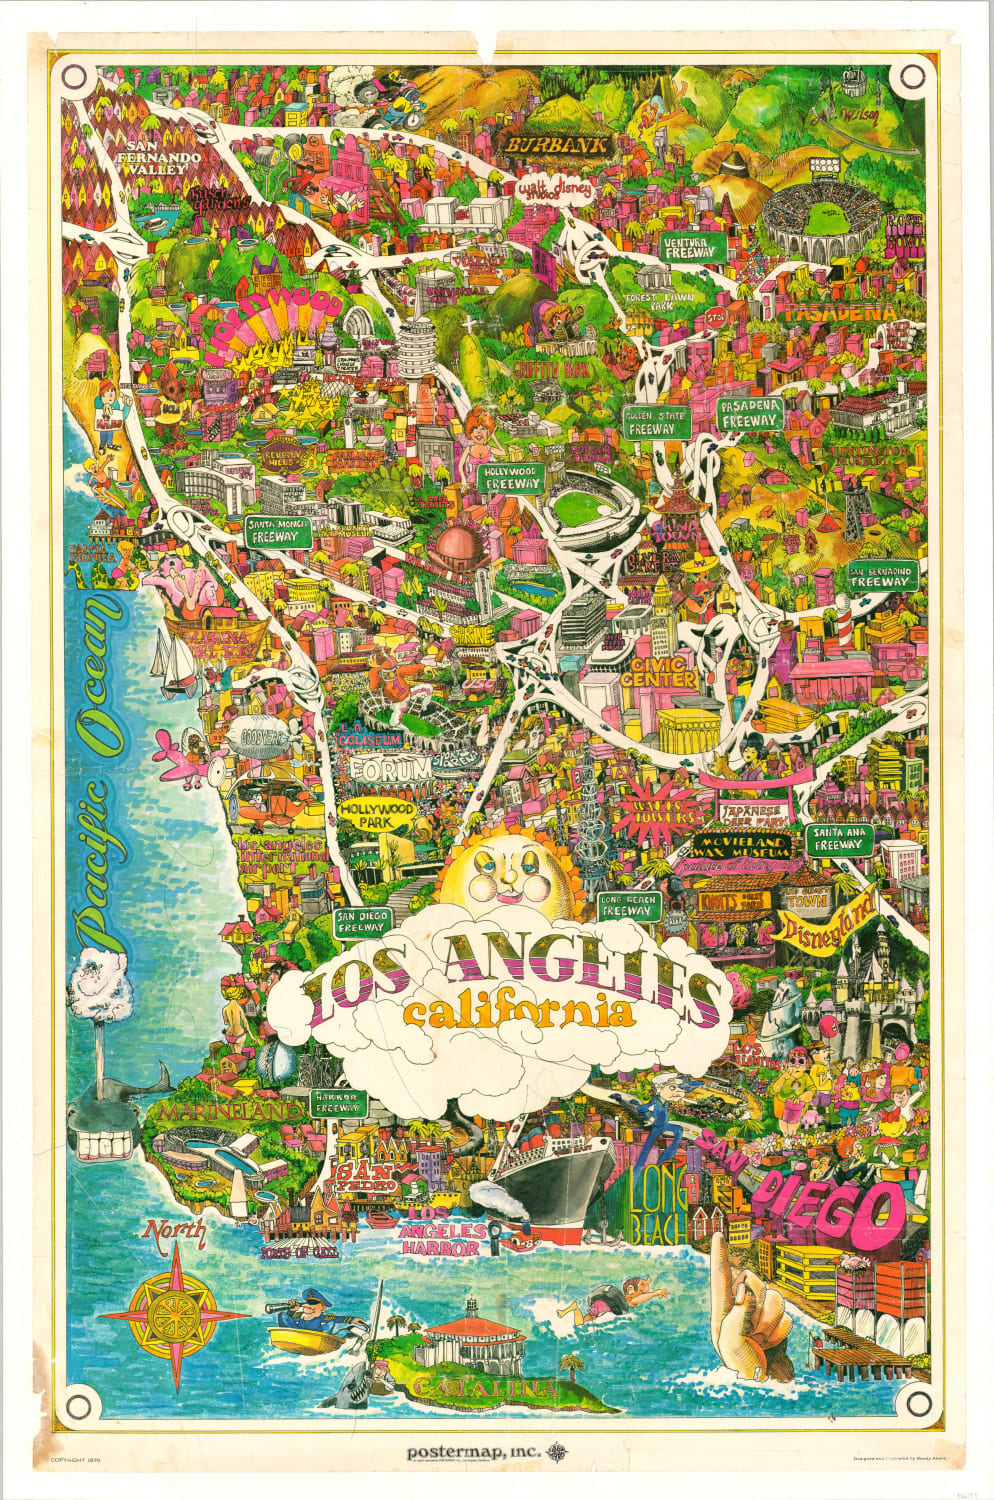 Los Angeles California - 1970 Poster Map